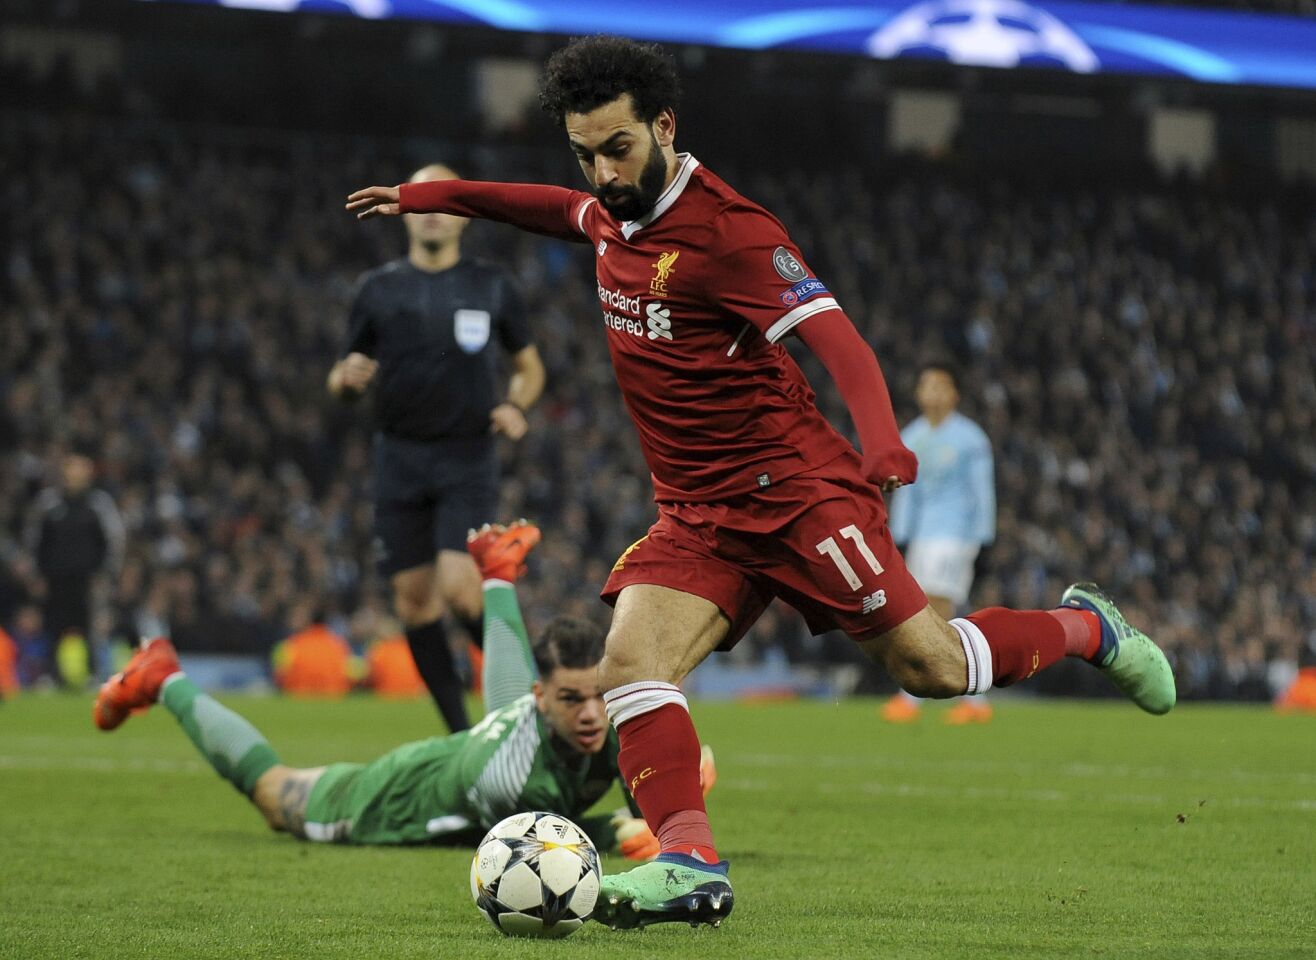 Liverpool's Mohamed Salah scores his side's first goal during the Champions League quarterfinal second leg soccer match between Manchester City and Liverpool at Etihad stadium in Manchester, England, Tuesday, April 10, 2018.